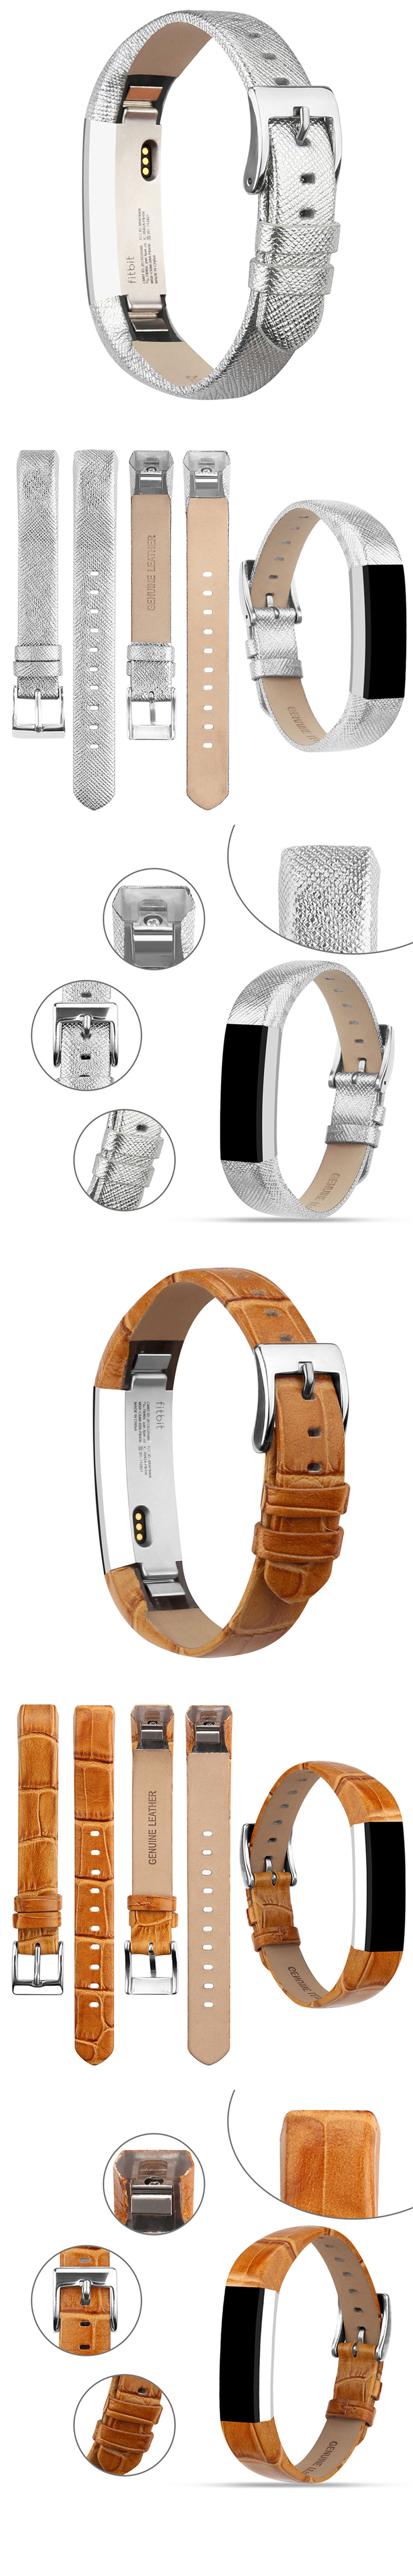 14mm-Watch-Band-Colorful-Genuine-Leather-Strap-Replacement-for-Fitbit-Alta-1289474